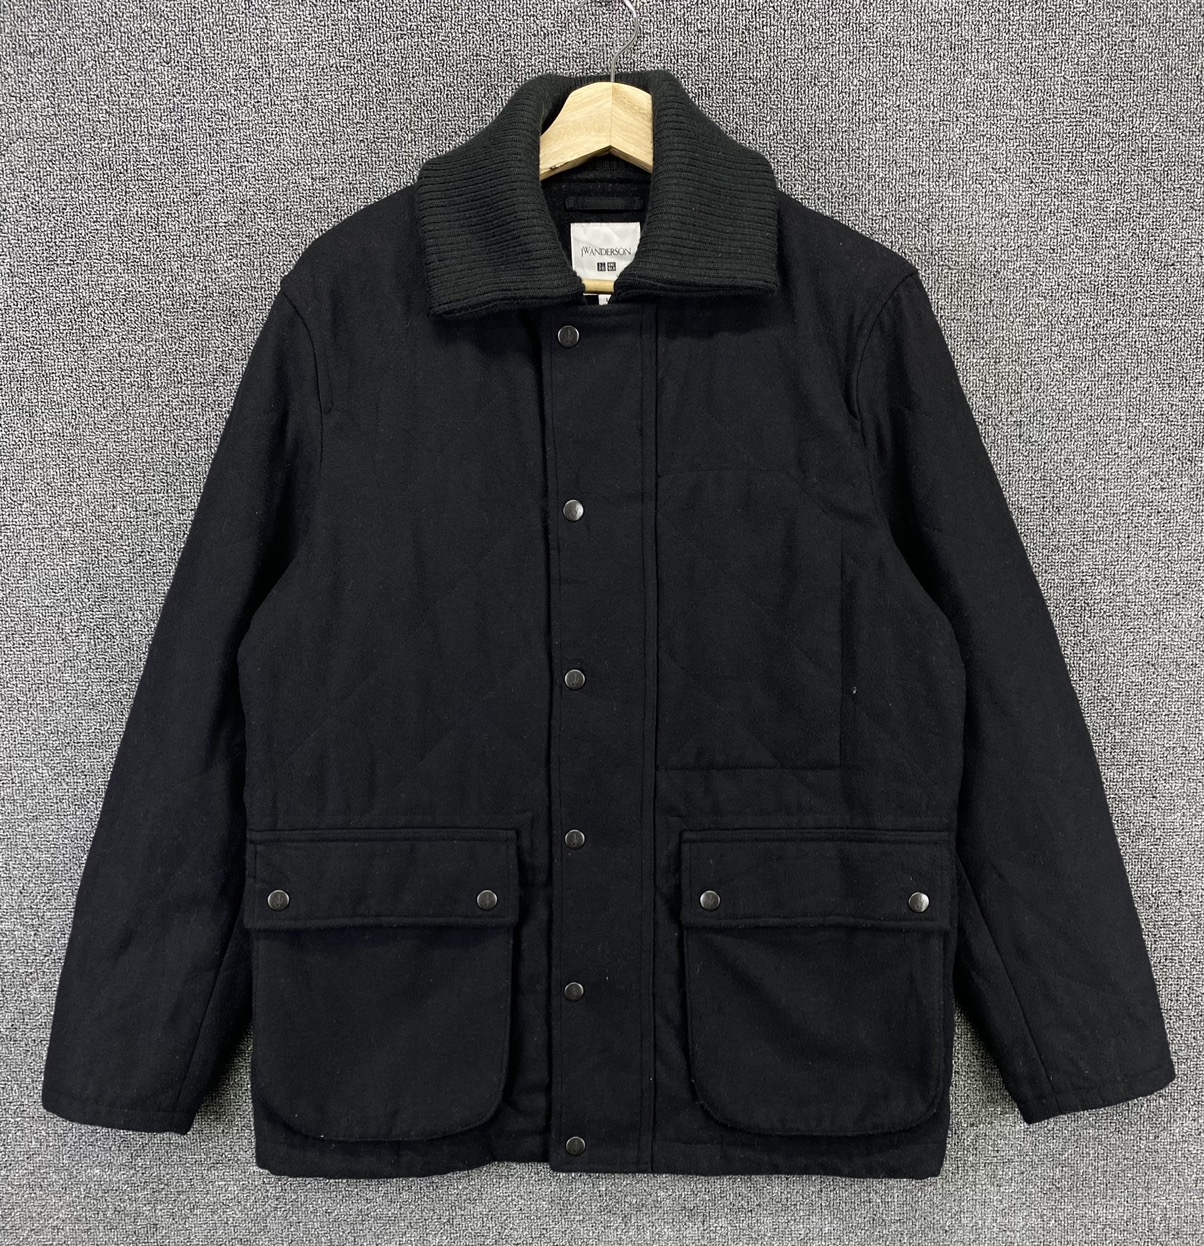 Uniqlo - J. W. Anderson x Uniqlo Double Pocket Quilted Wool Jacket - 1